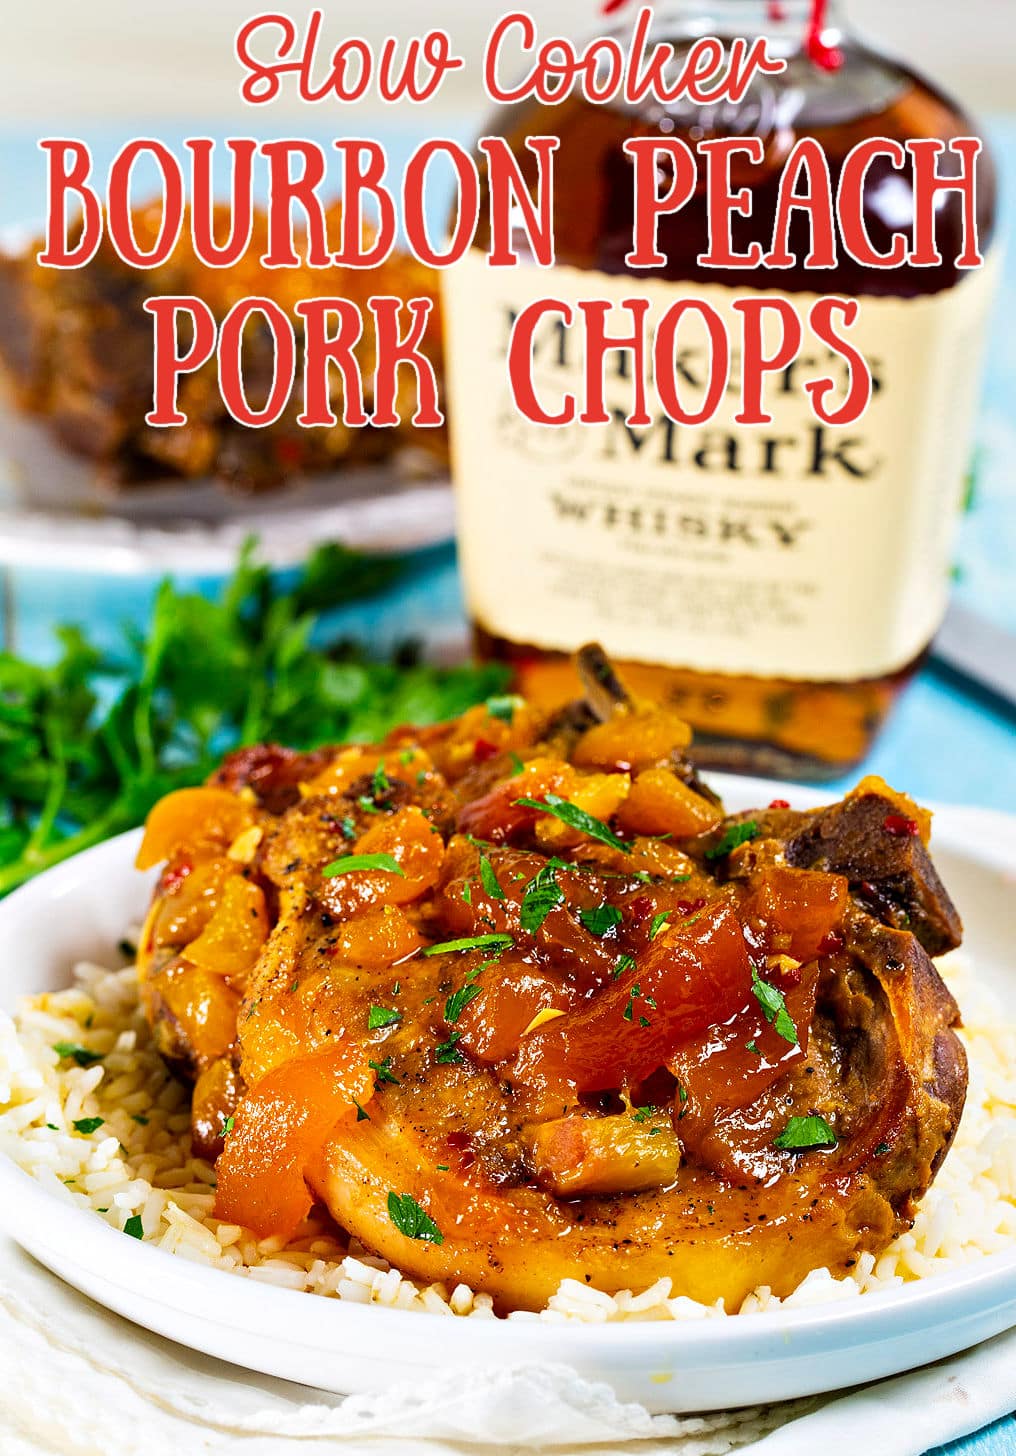 Slow Cooker Bourbon Peach Pork Chops over rice on a plate.